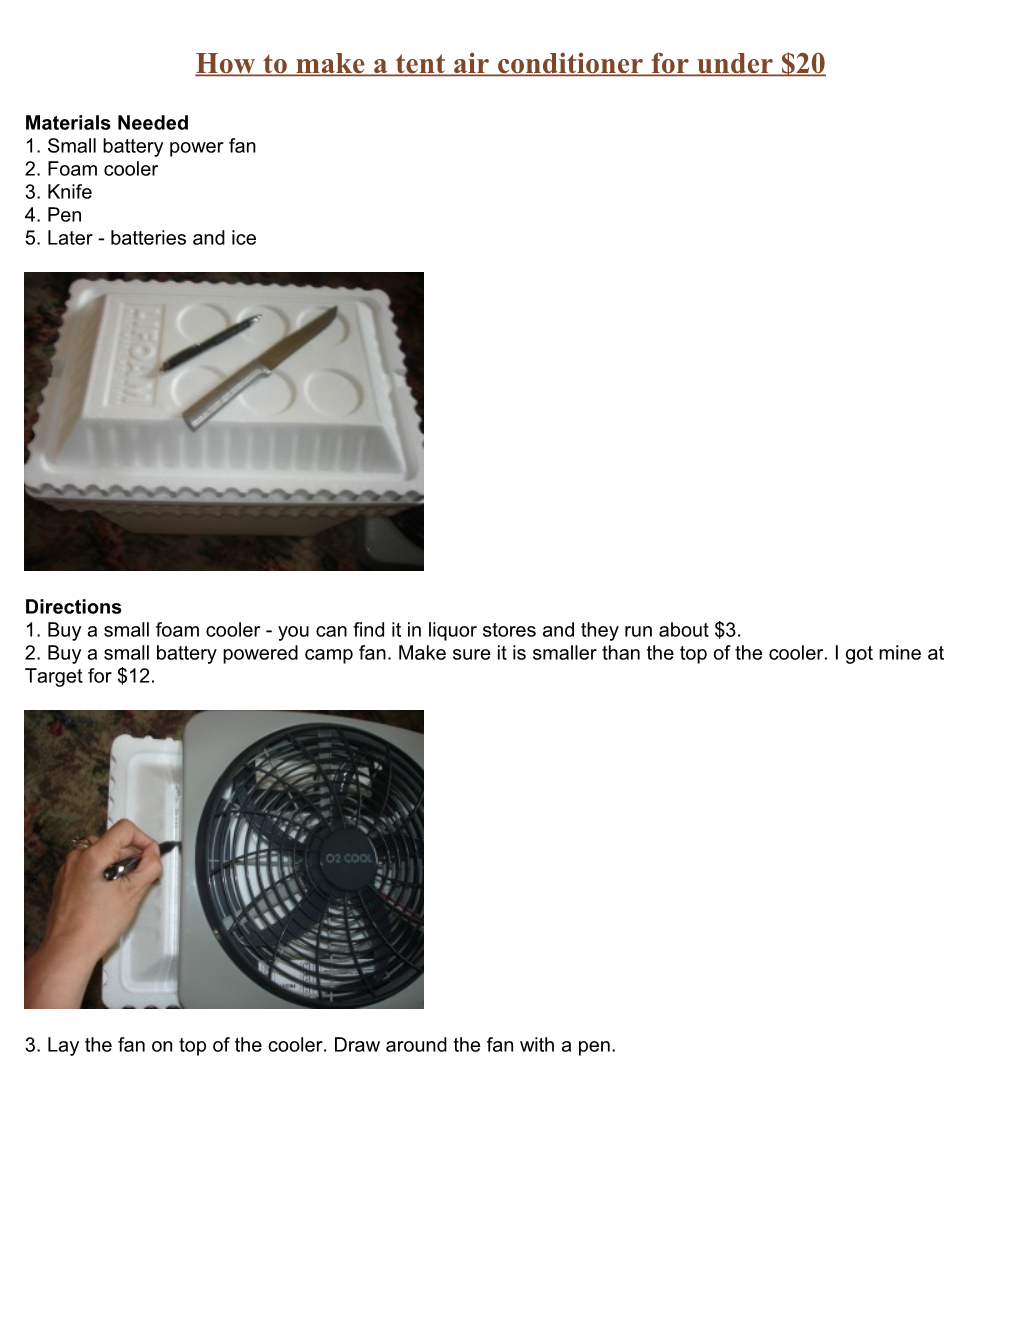 How to Make a Tent Air Conditioner for Under $20